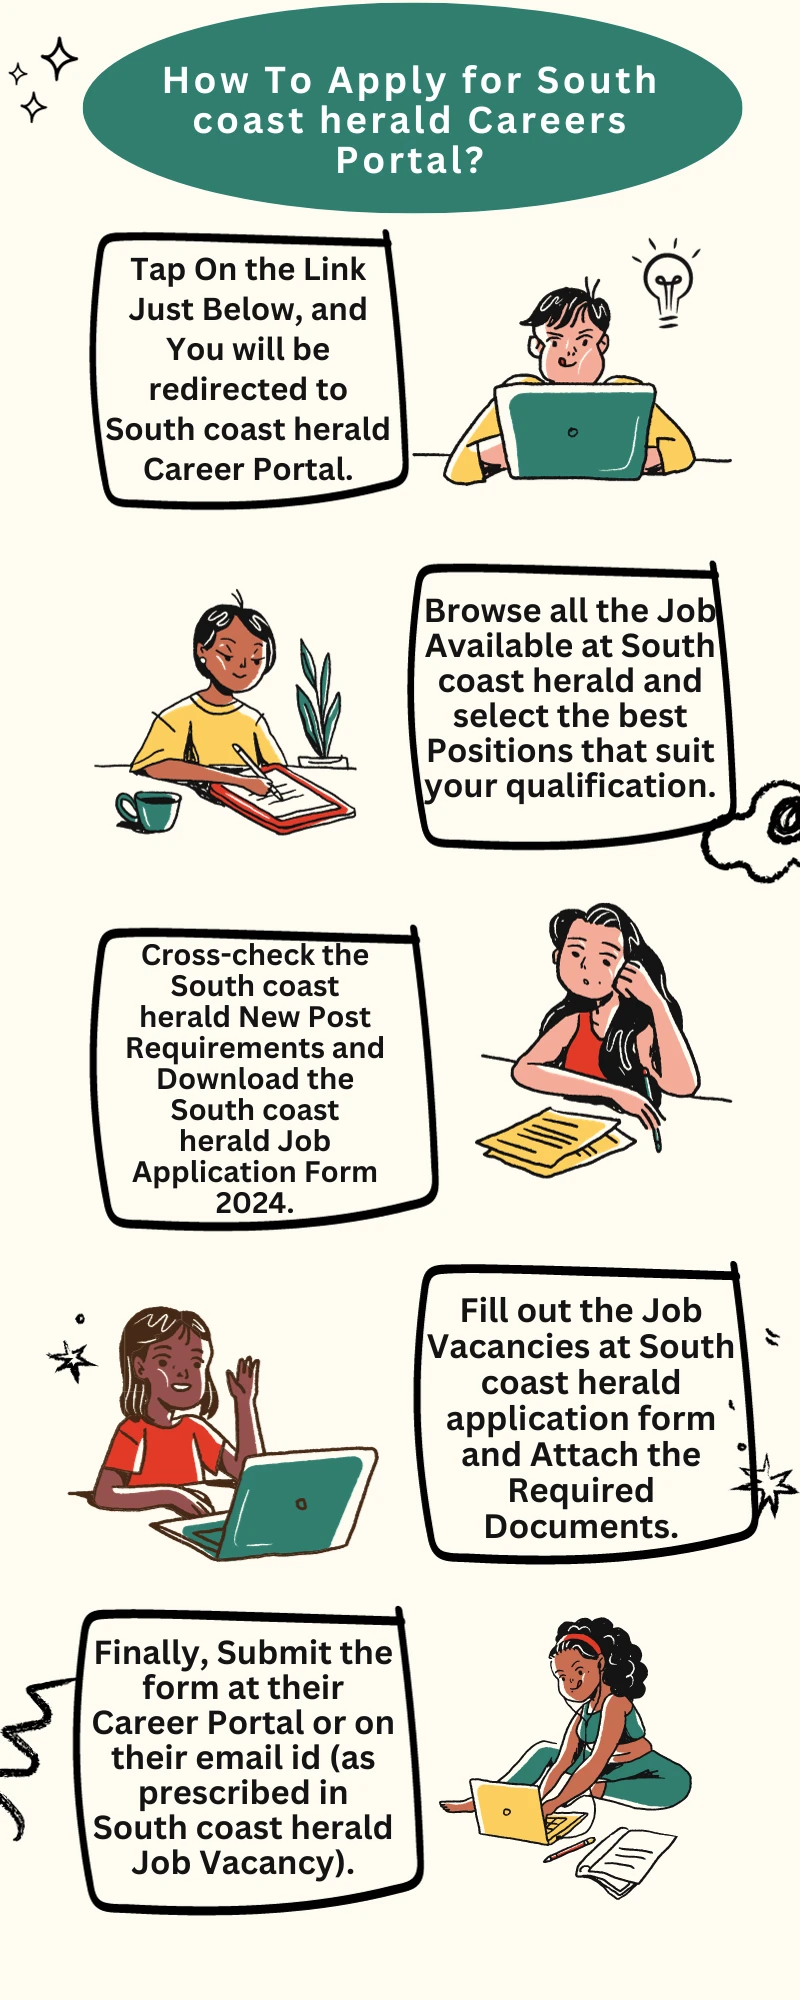 How To Apply for South coast herald Careers Portal?